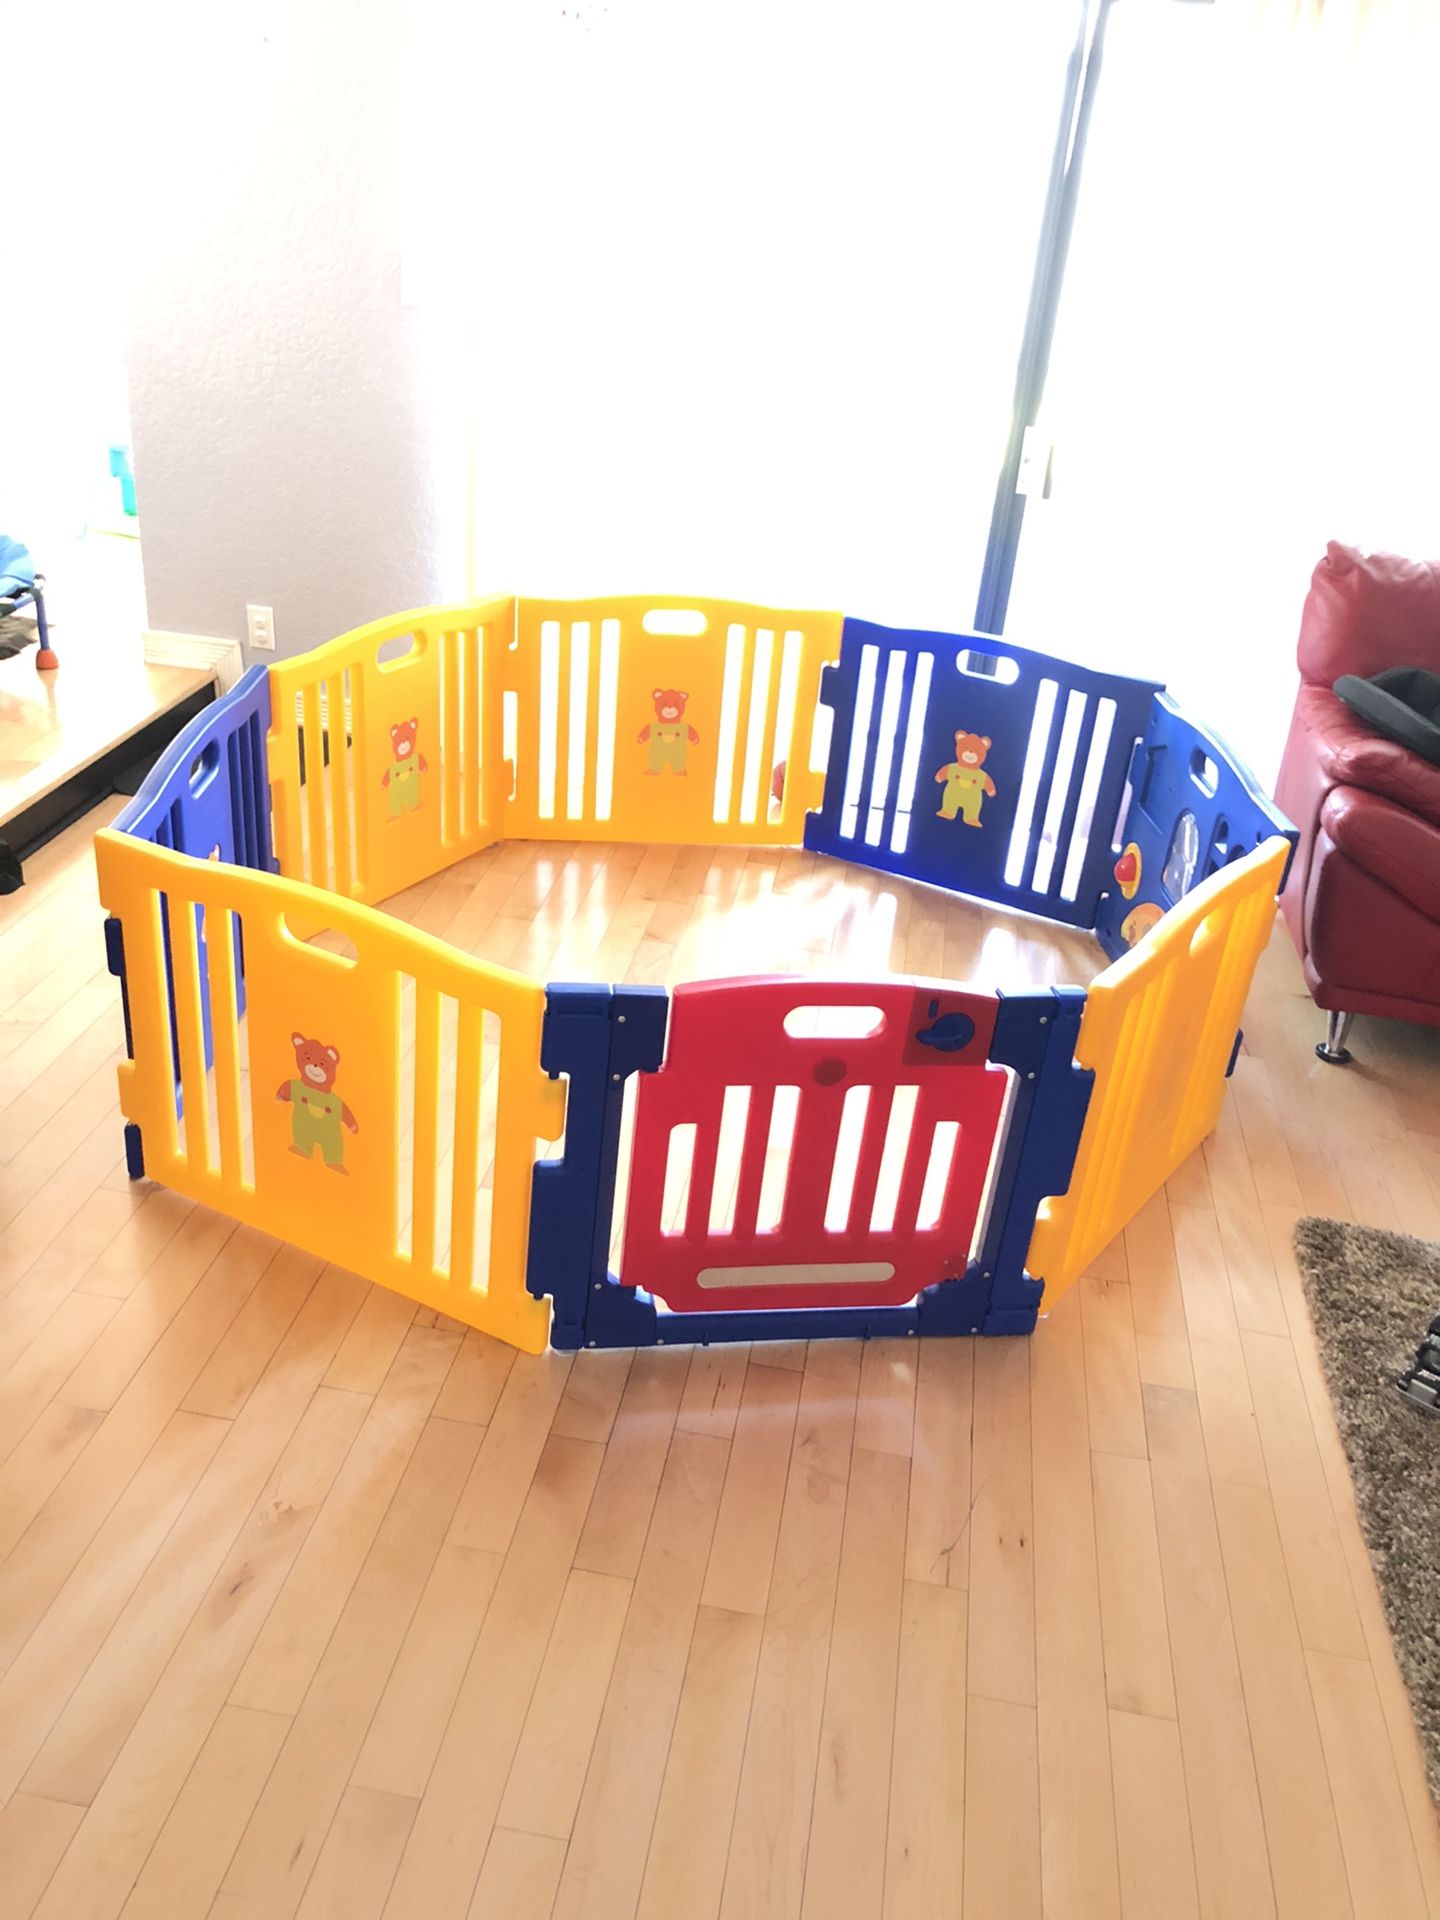 Kids connect play pen with a lot of toys